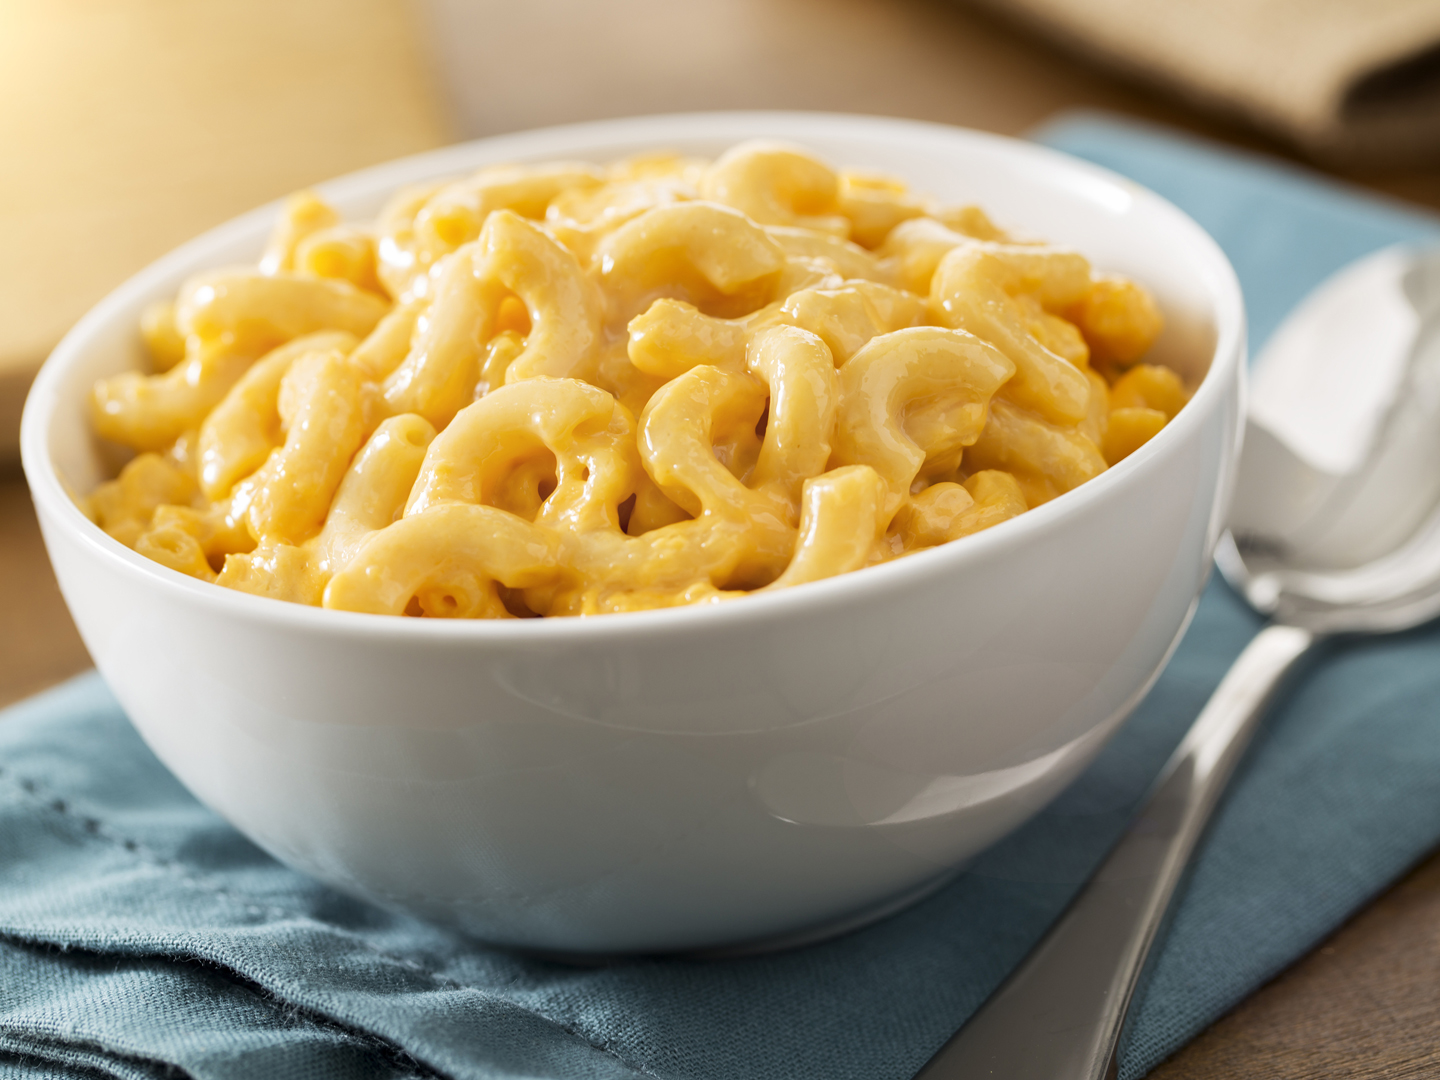 A white bowl of the best baked homemade macaroni and cheese on a table with a blue napkin.  The recipe is made with elbow pasta and cheddar cheese.  The shot is vertical and has selective focus.  Macaroni and cheese is a American comfort food or soul food.